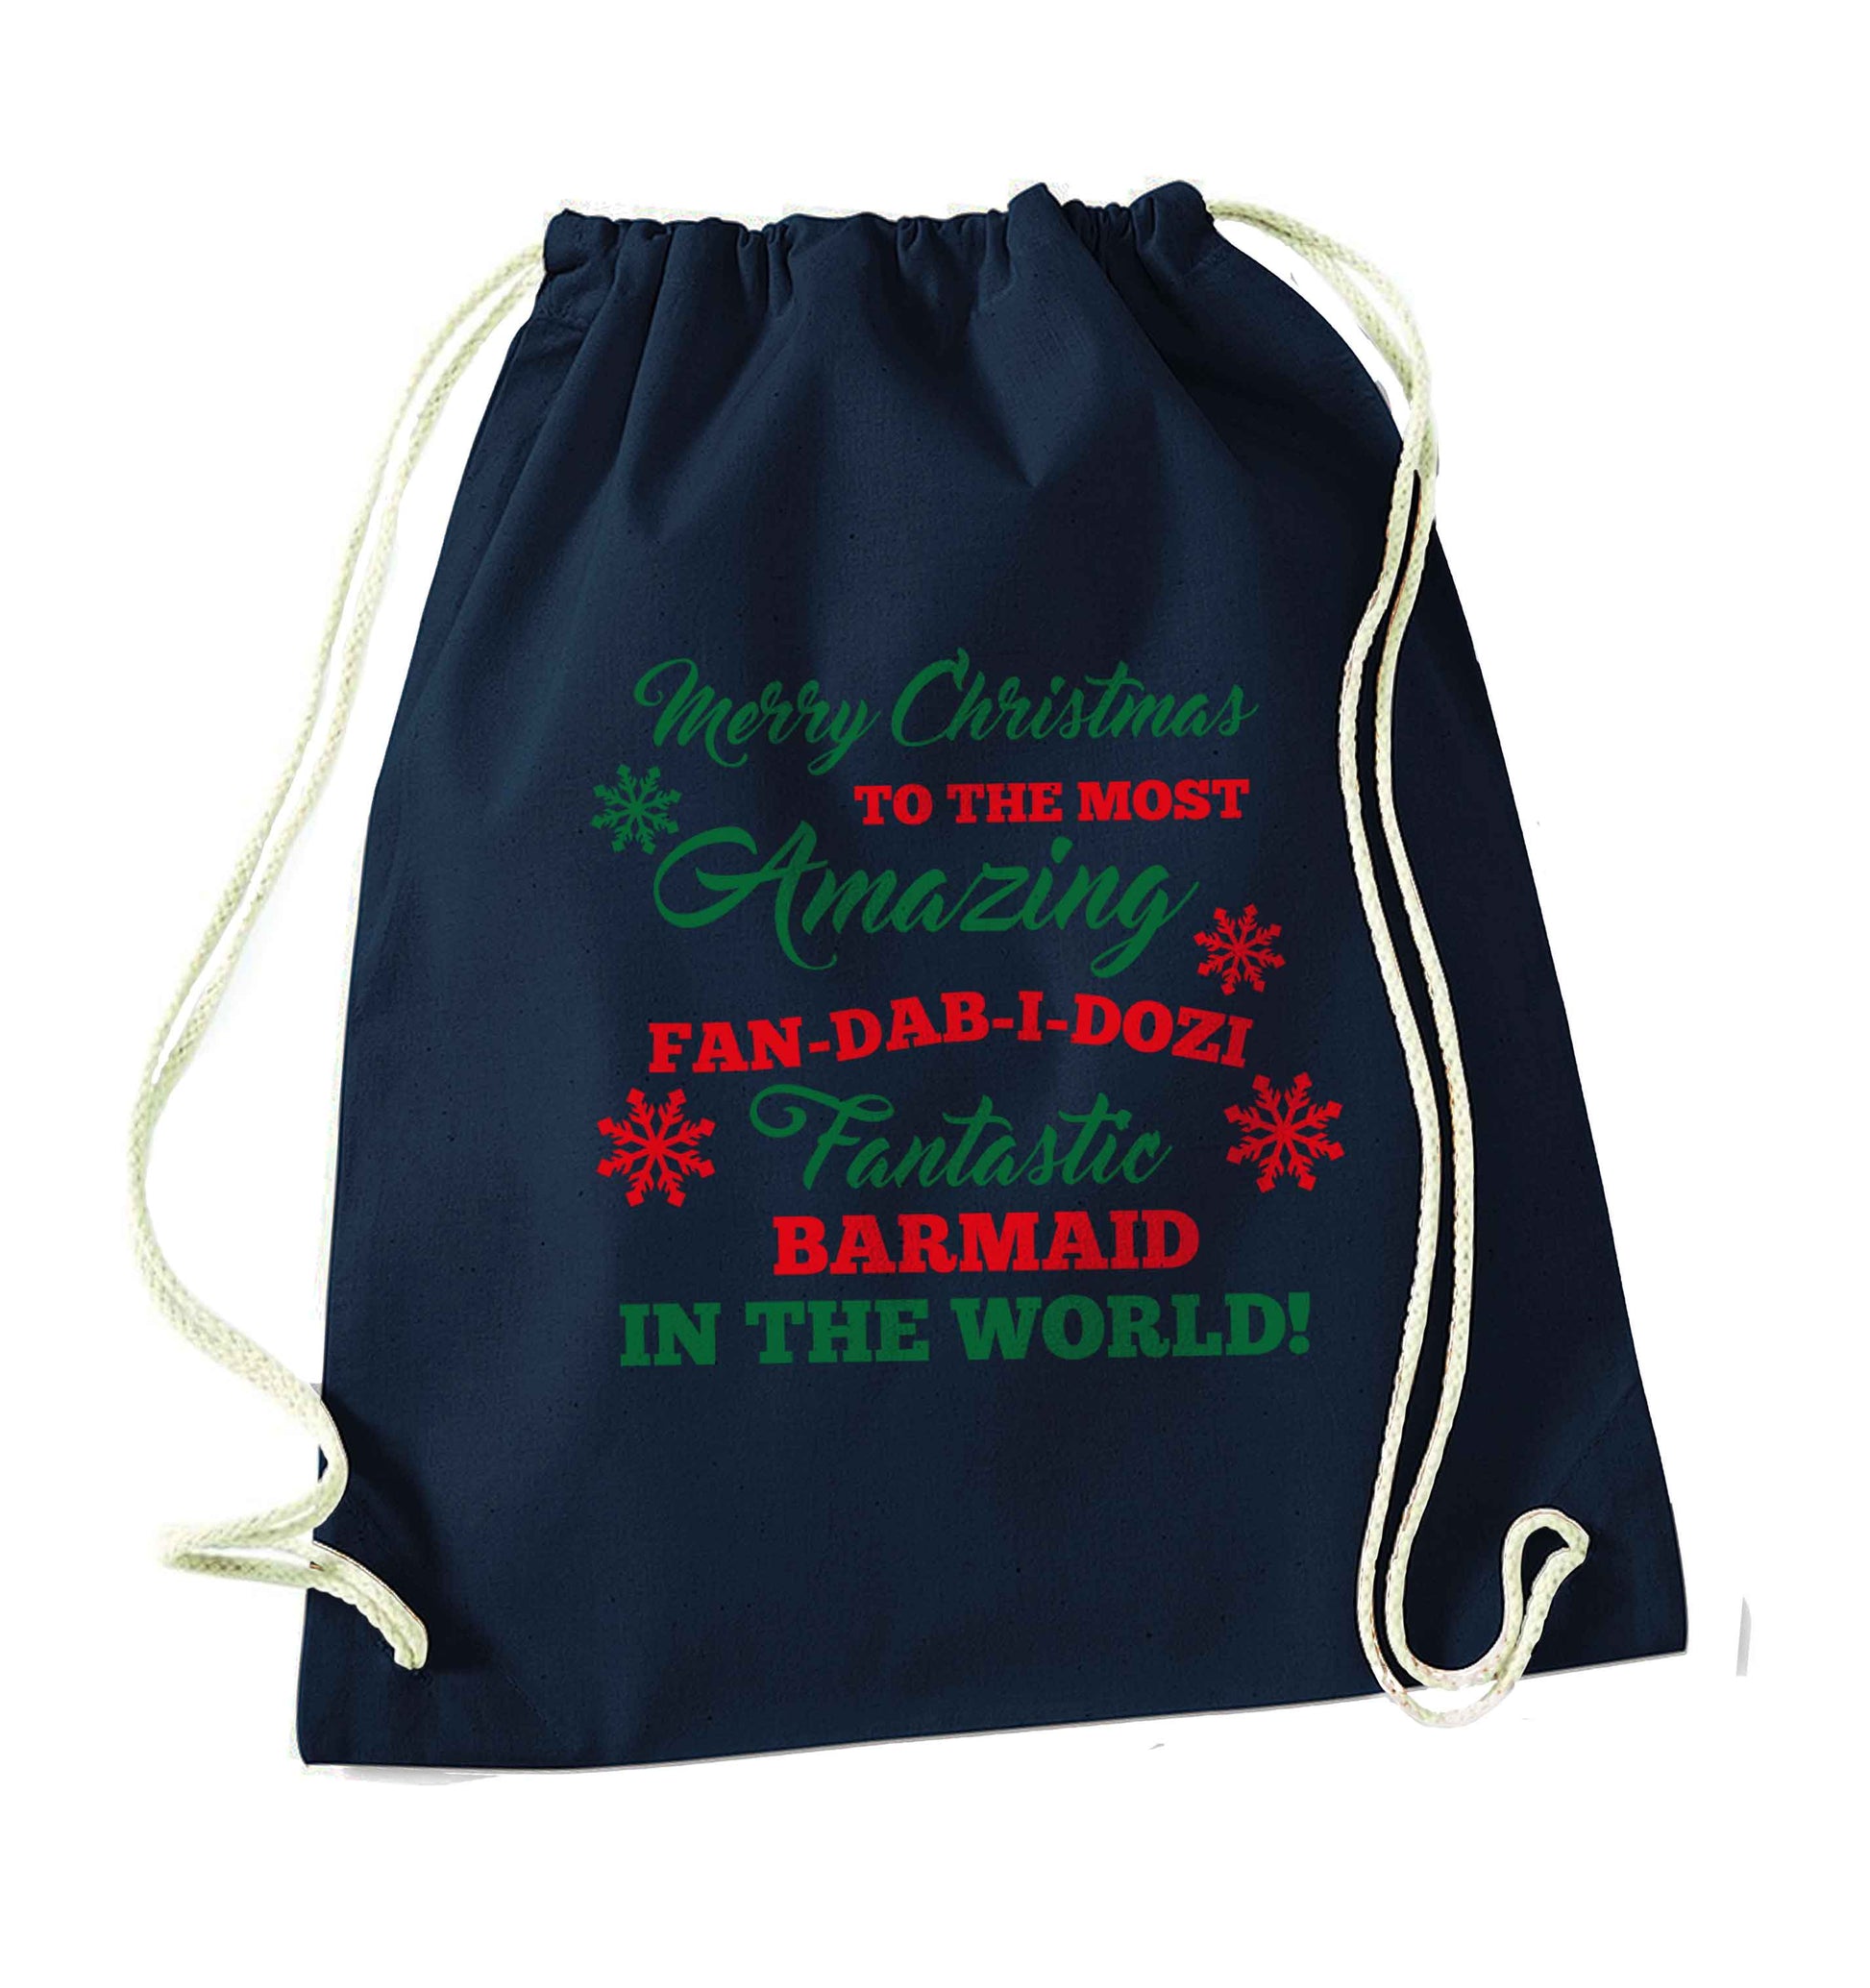 Merry Christmas to the most amazing barmaid in the world! navy drawstring bag